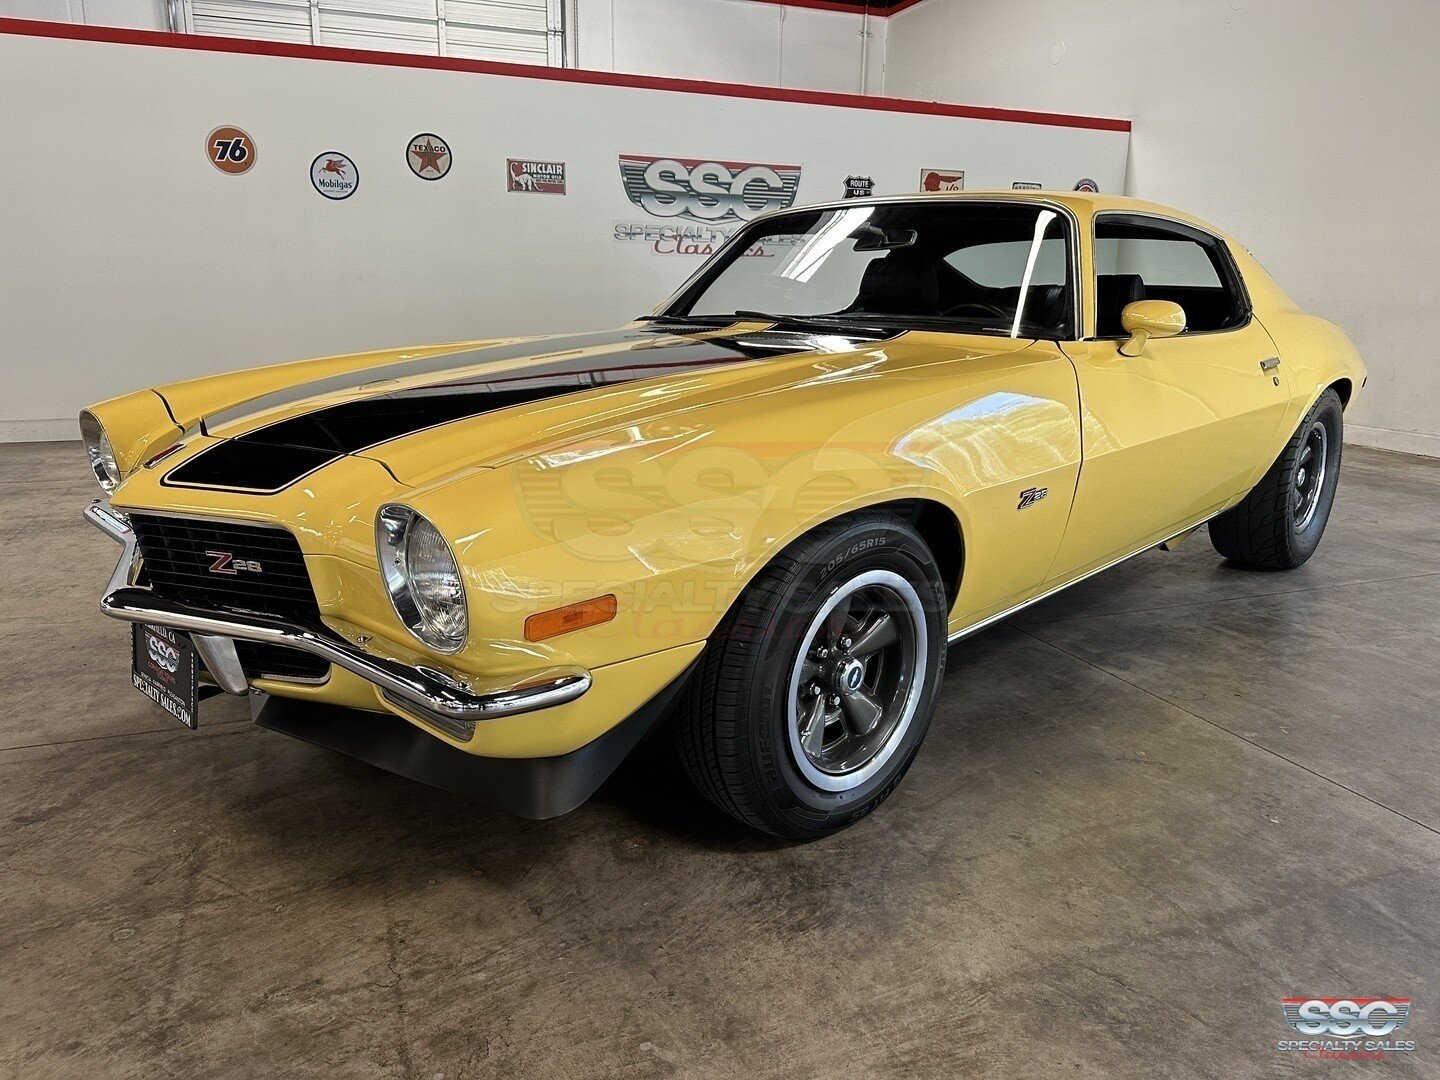 1971 Chevrolet Camaro Classic Cars for Sale - Classics on Autotrader